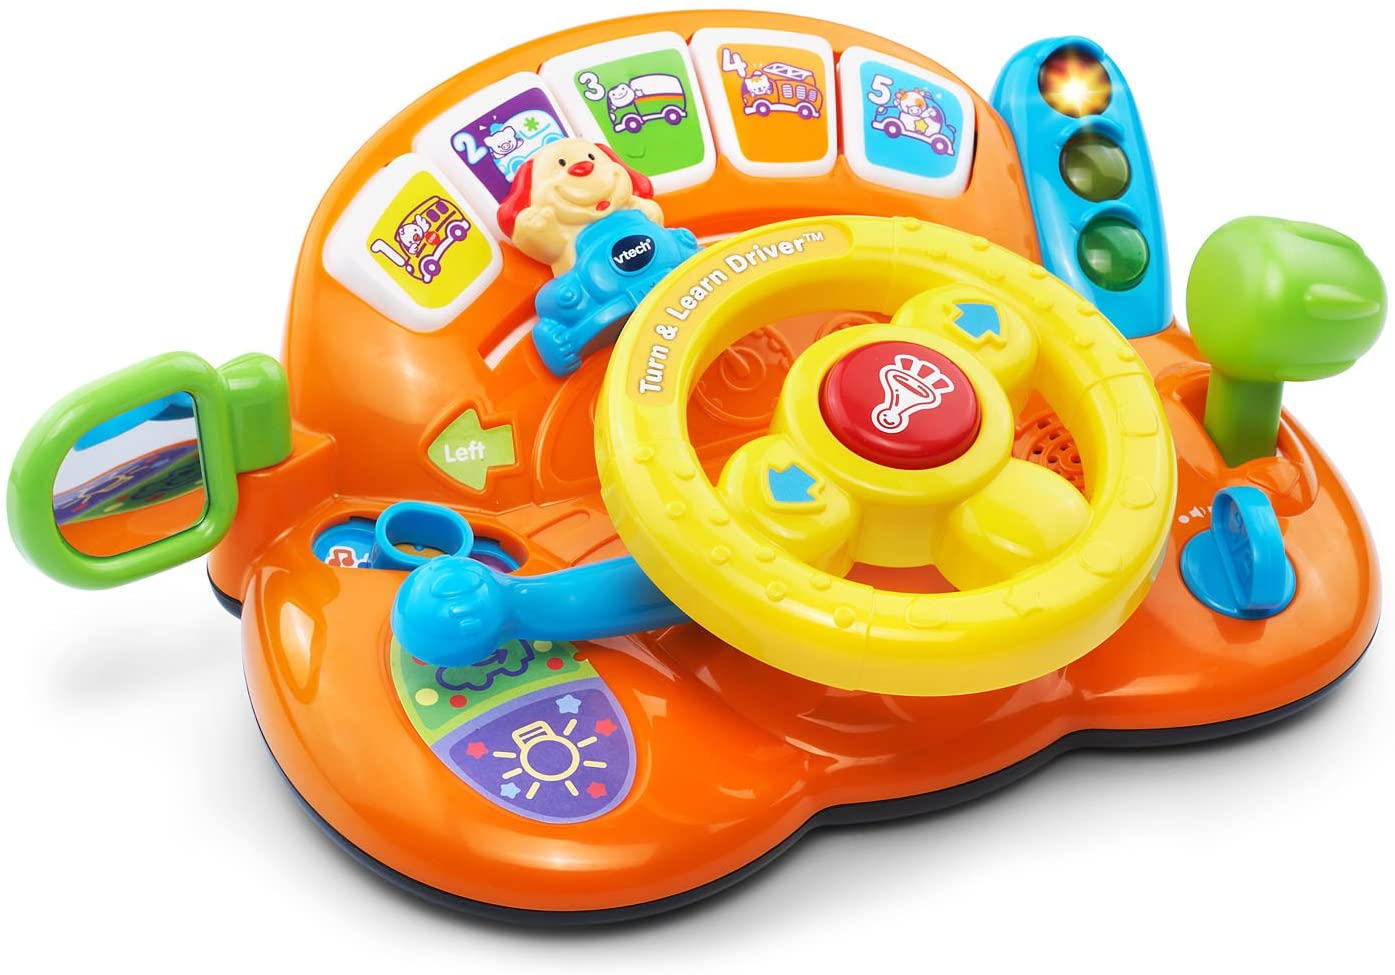 VTech Turn and Learn Driver, Orange - Educational Toy